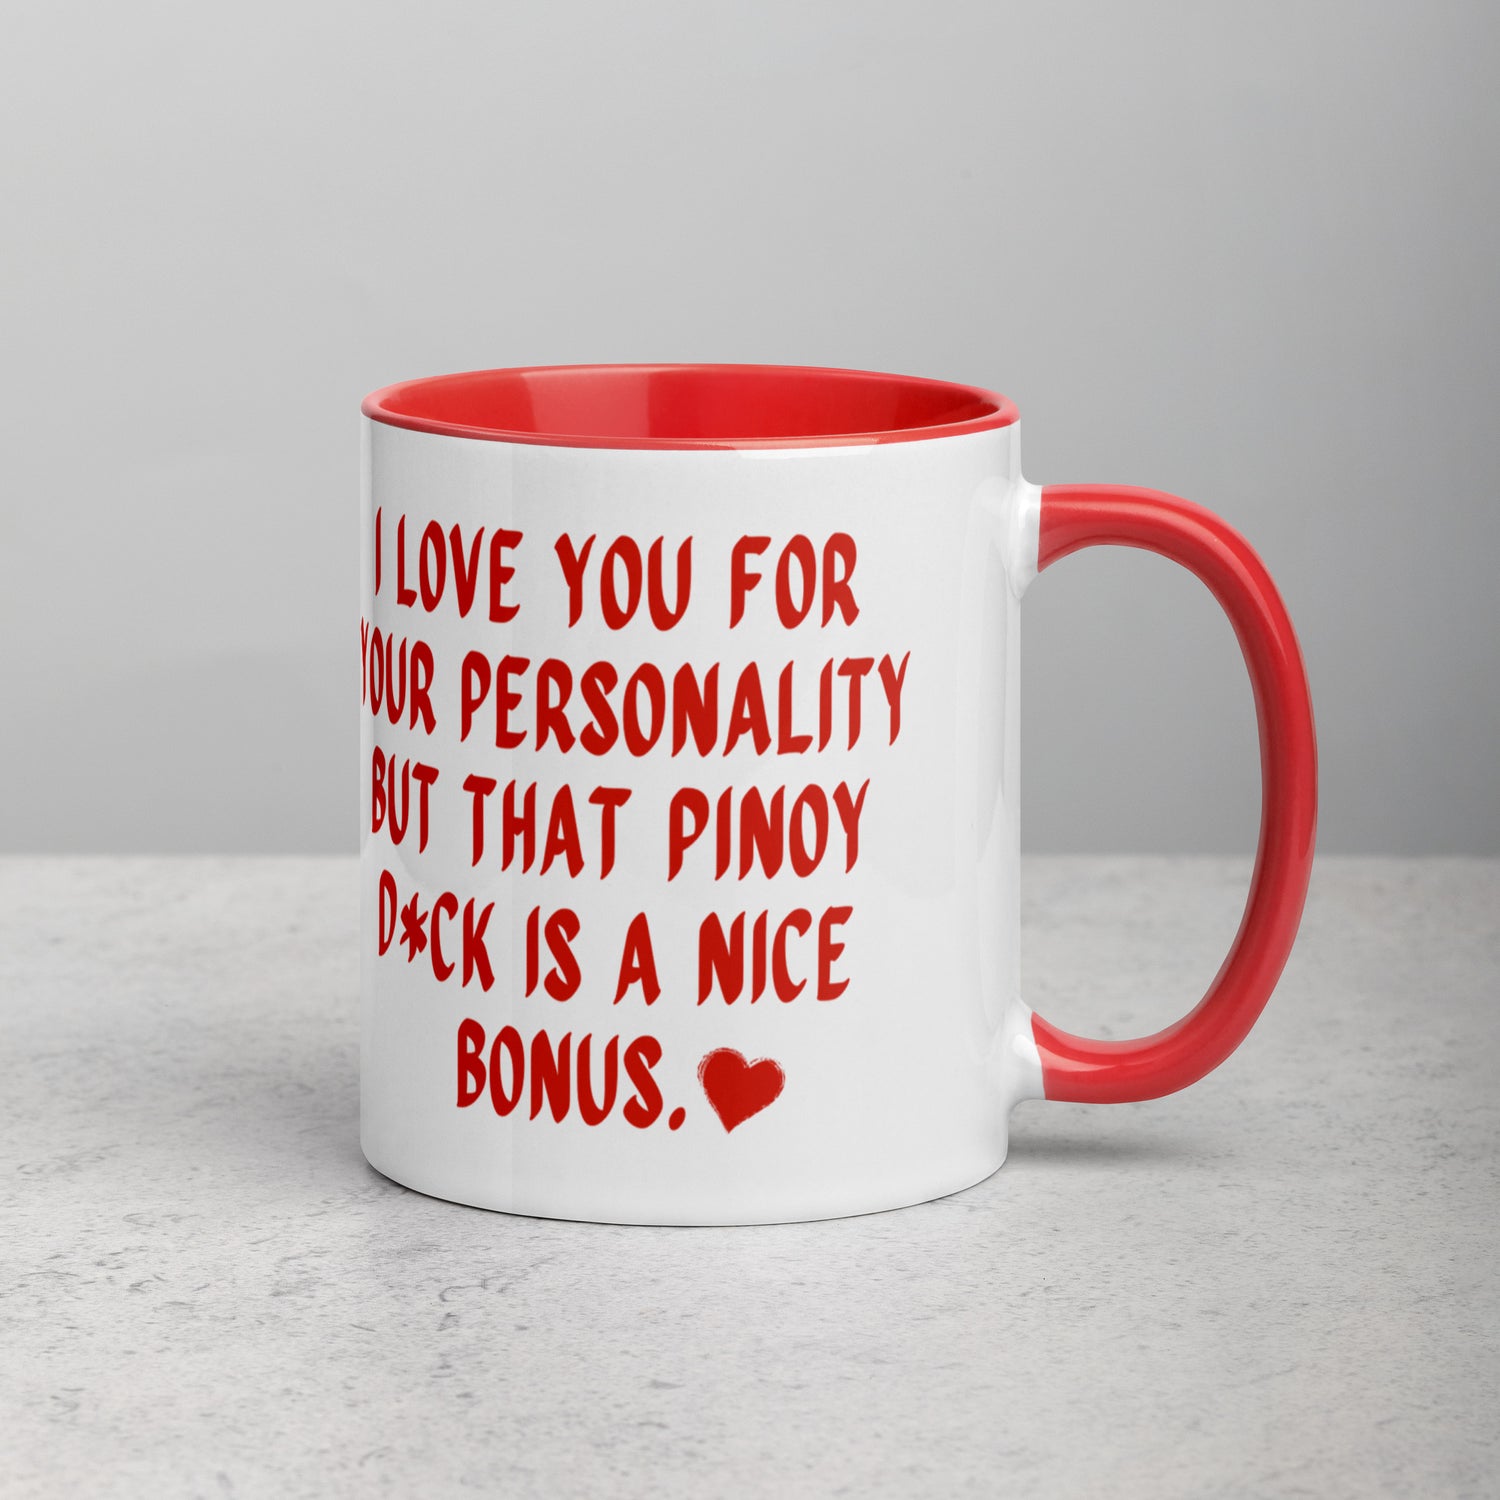 I Love You For Your Personality Funny Pinoy Valentine's Day Mug in color variant Red.